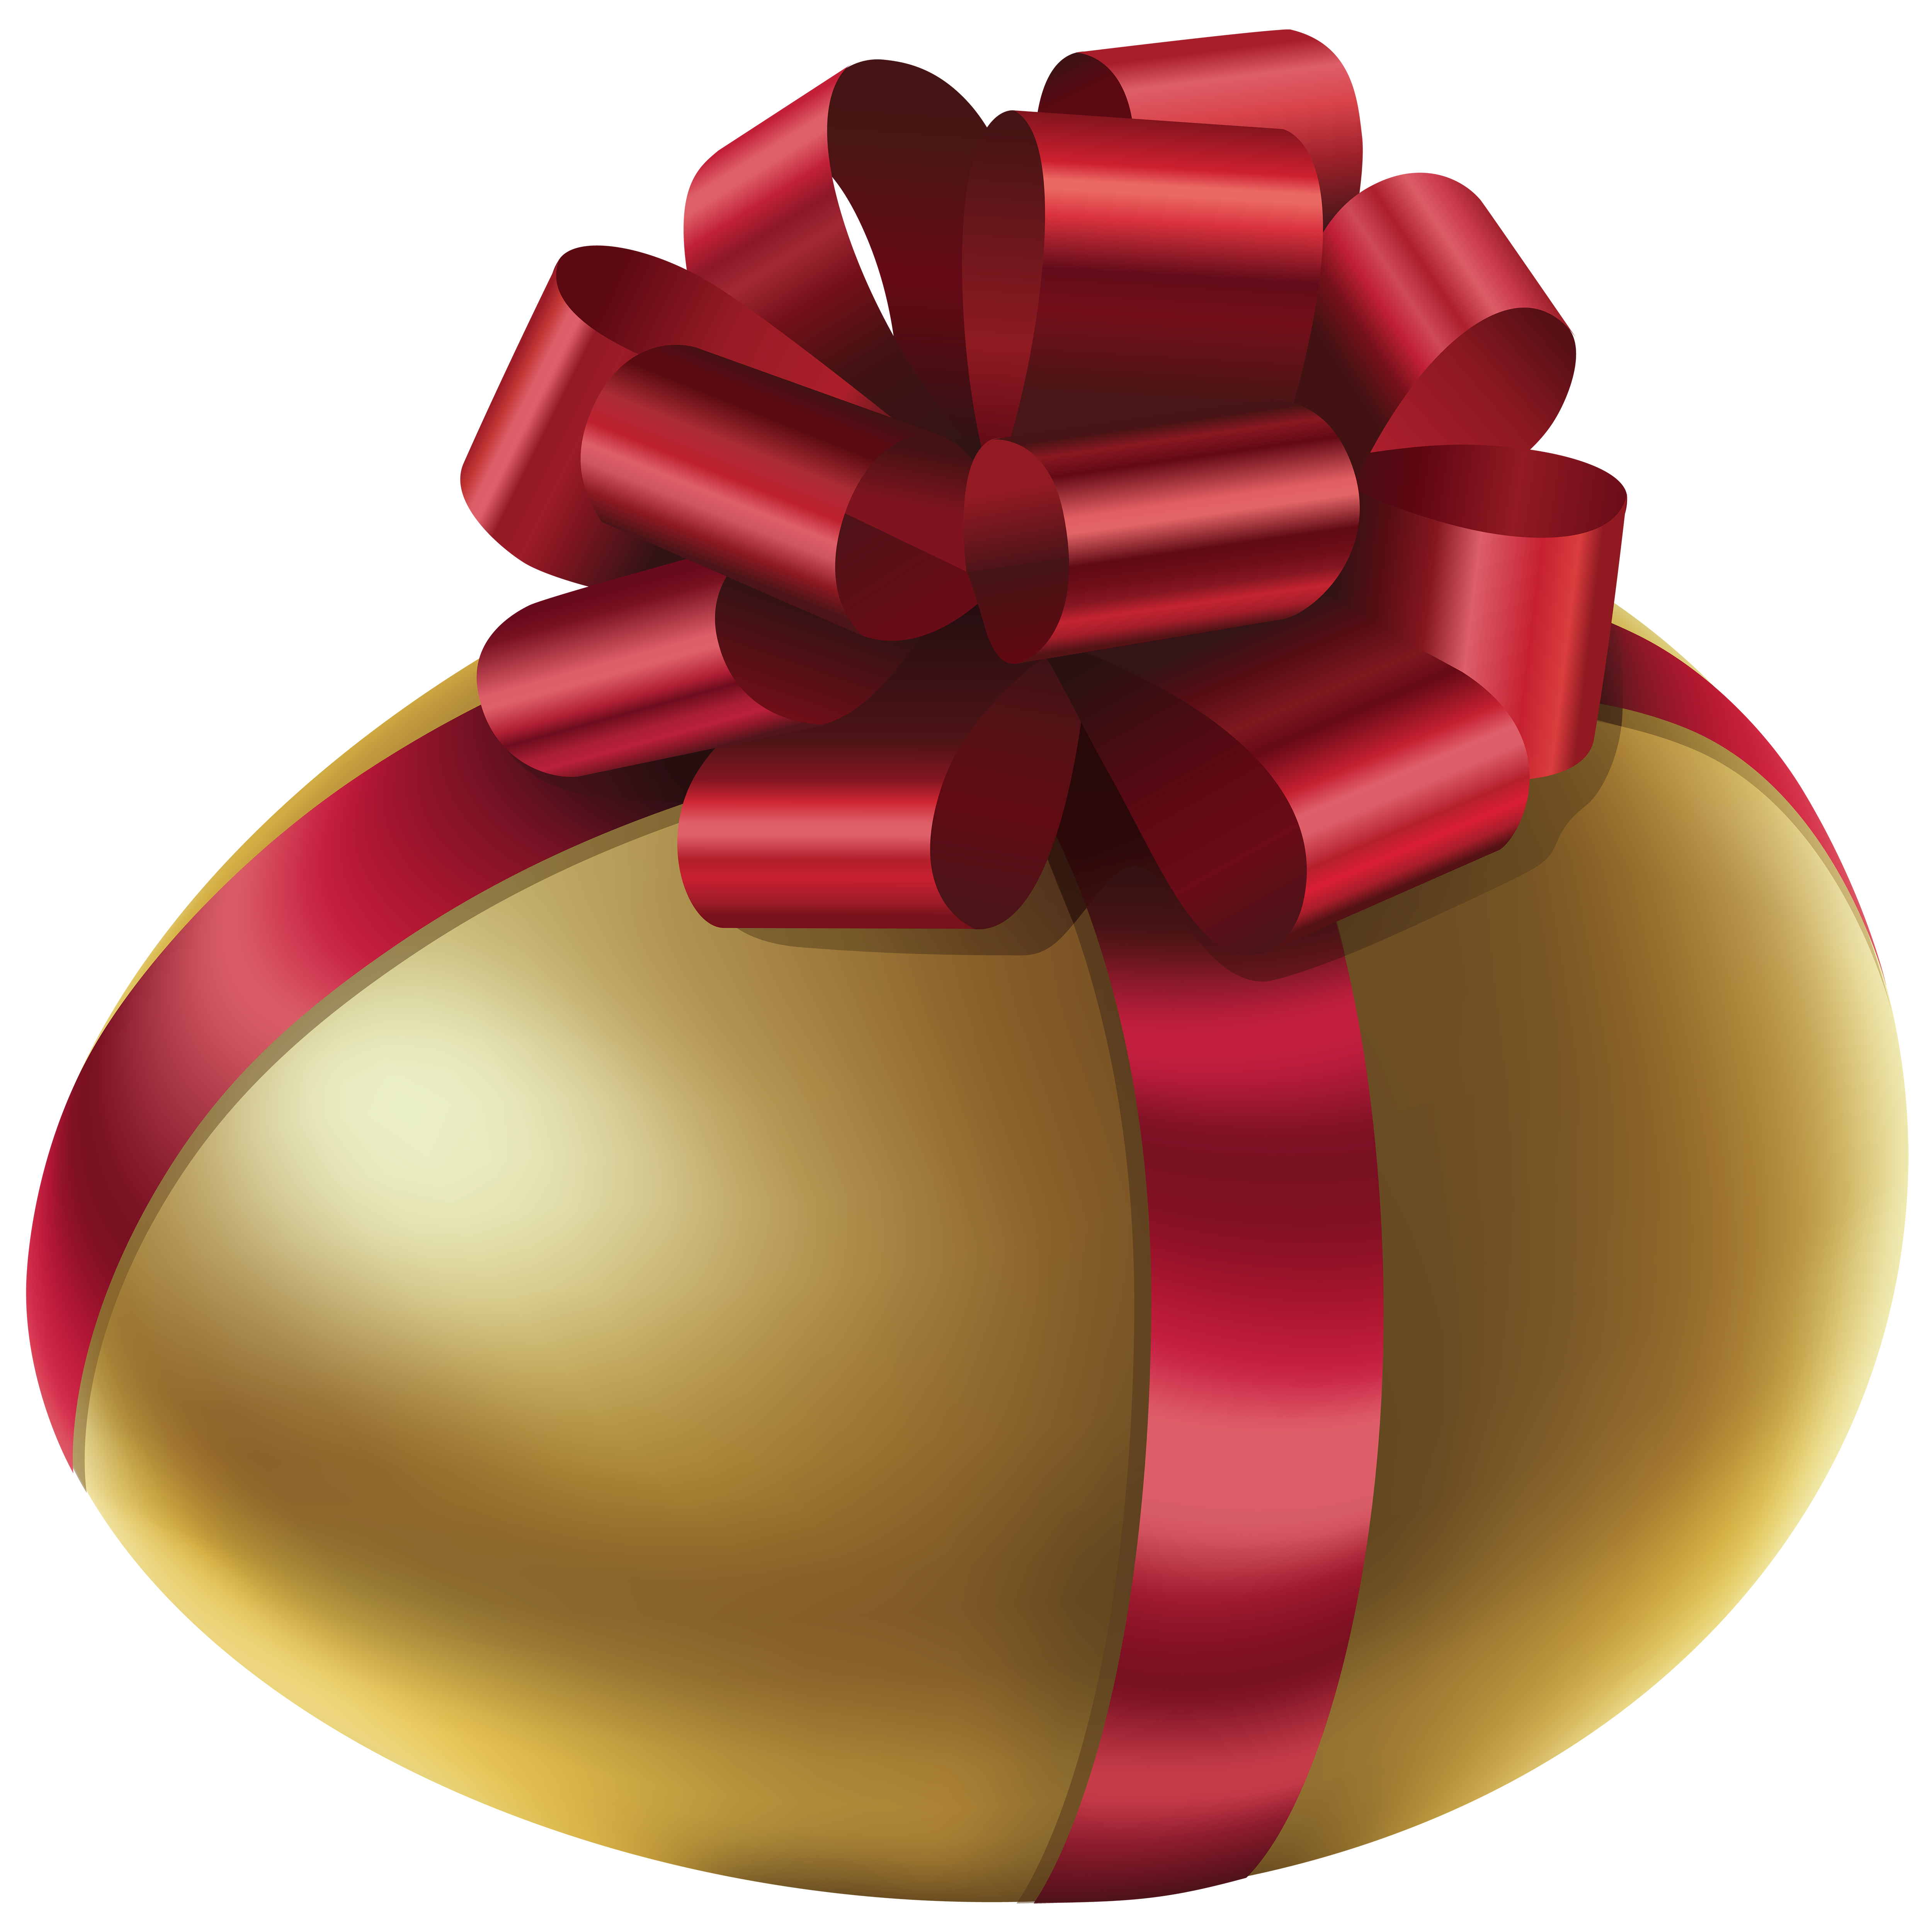 Easter Golden Egg with Red Bow PNG Clip Art Image.